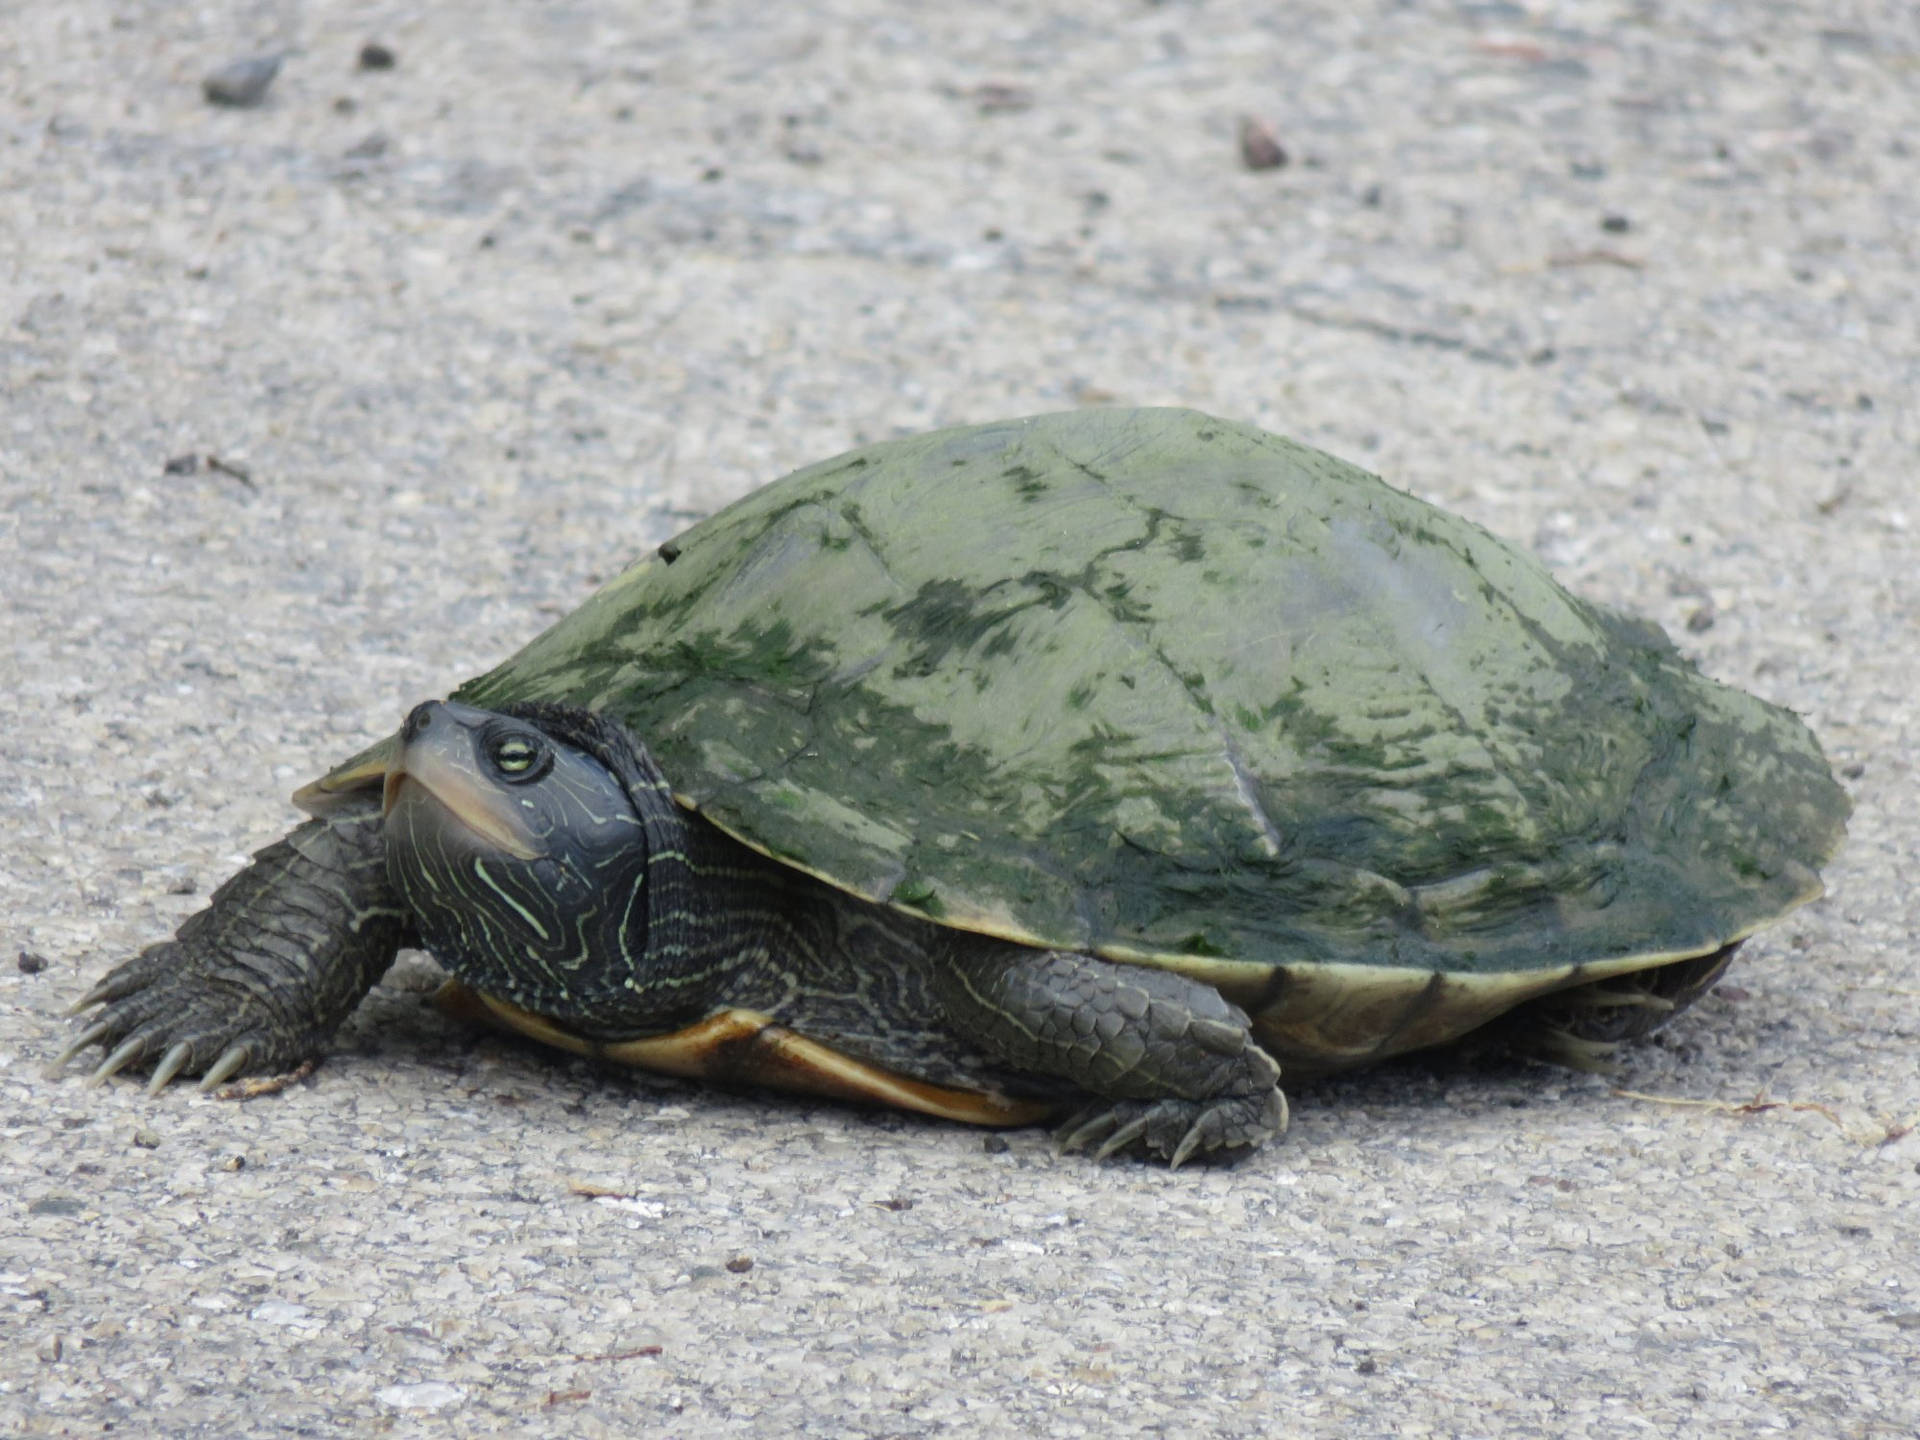 Adult Female Common Map Turtle Wallpaper